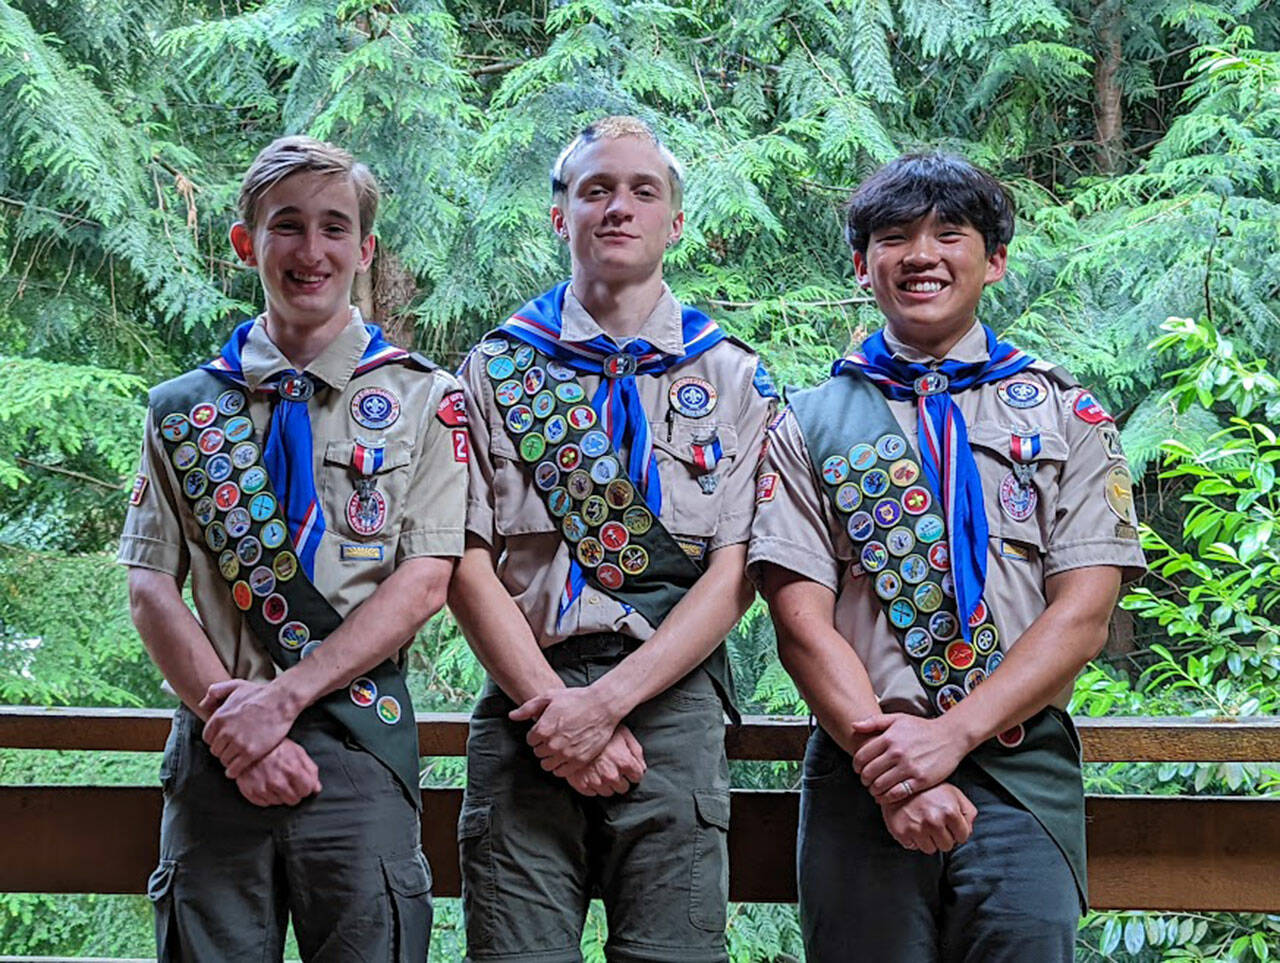 Karen Boyle Photo
(Left to right) Scouts Isaac Danielsen, George Murphy and Danny Boyle all earned the rank of Eagle over the past year.